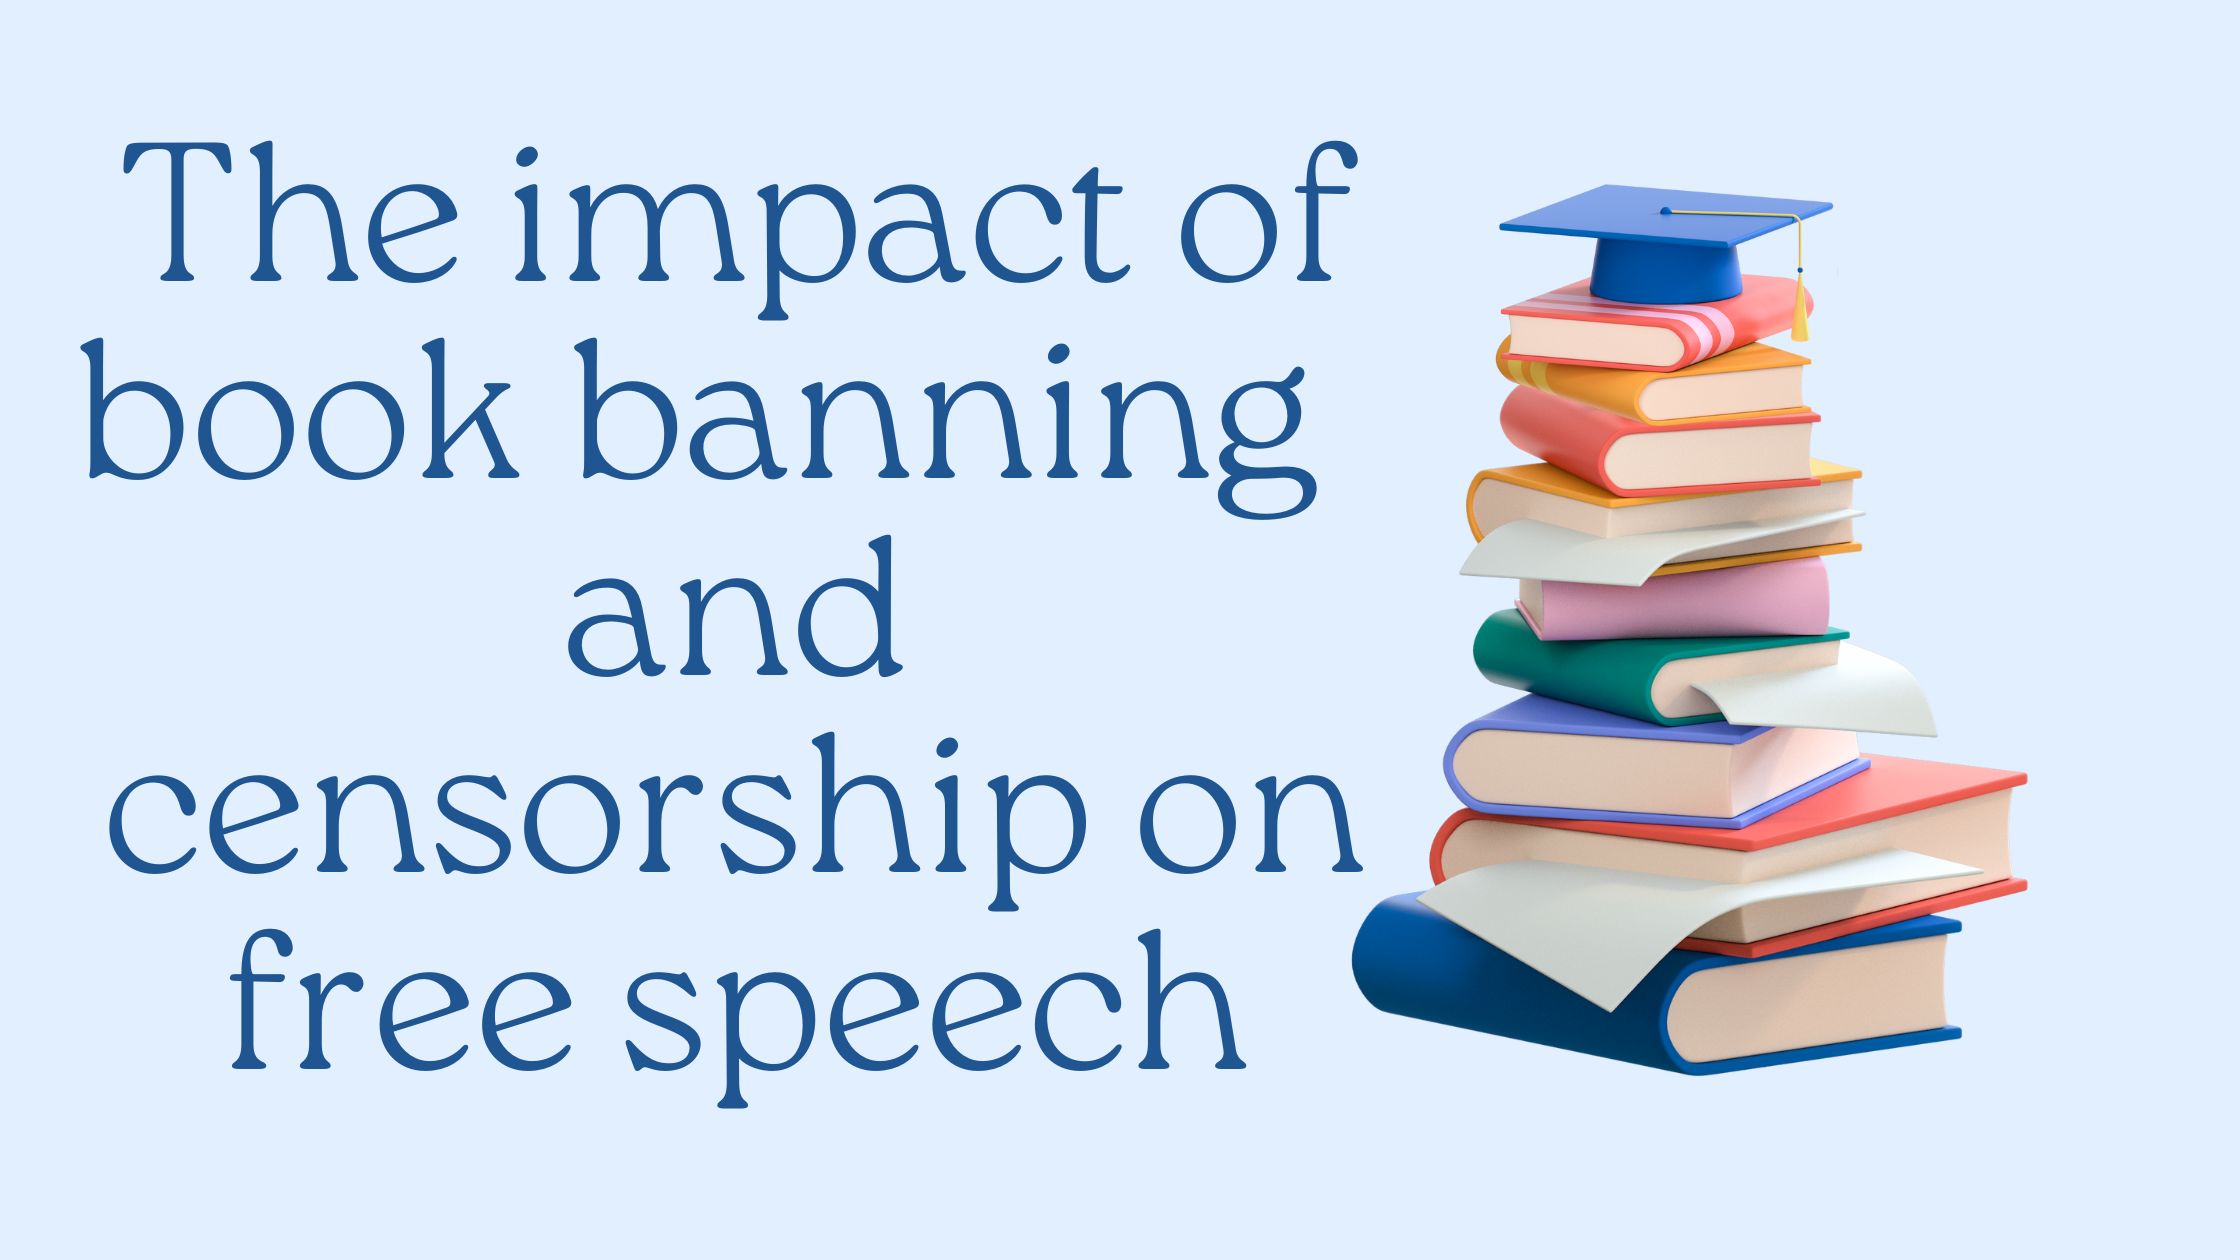 The impact of book banning and censorship on free speech